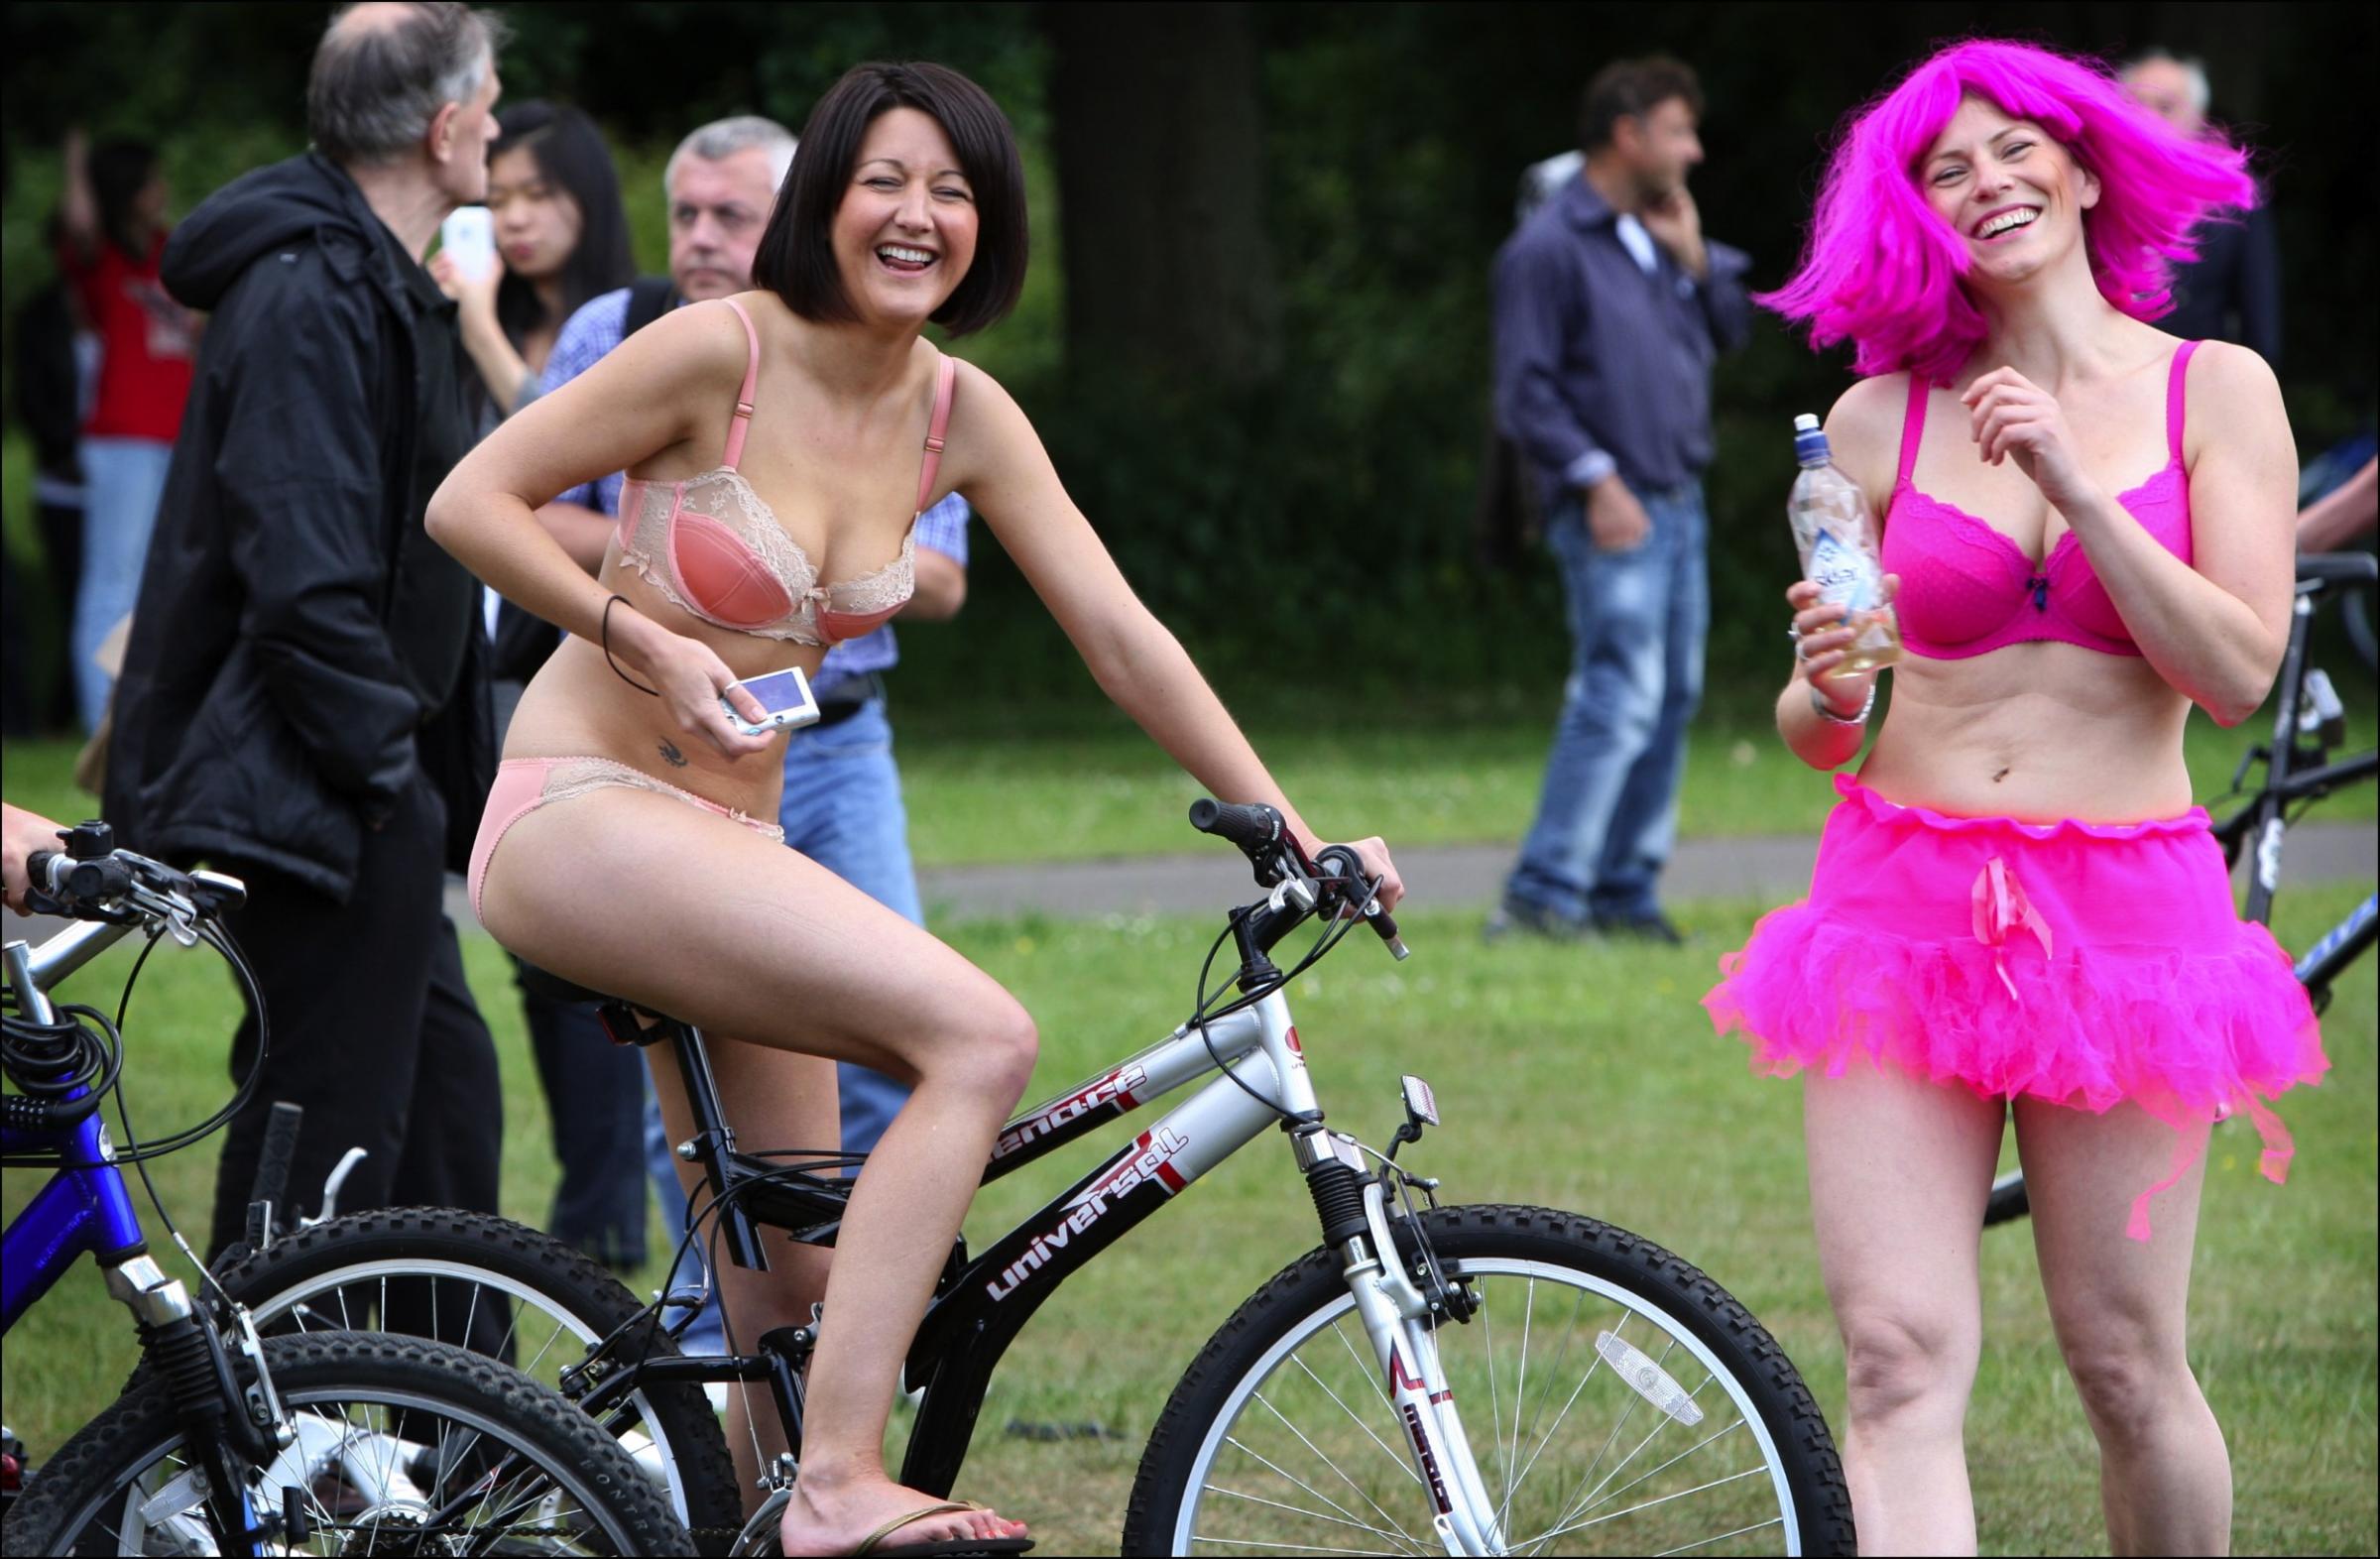 Nude Bicycle Ride 20